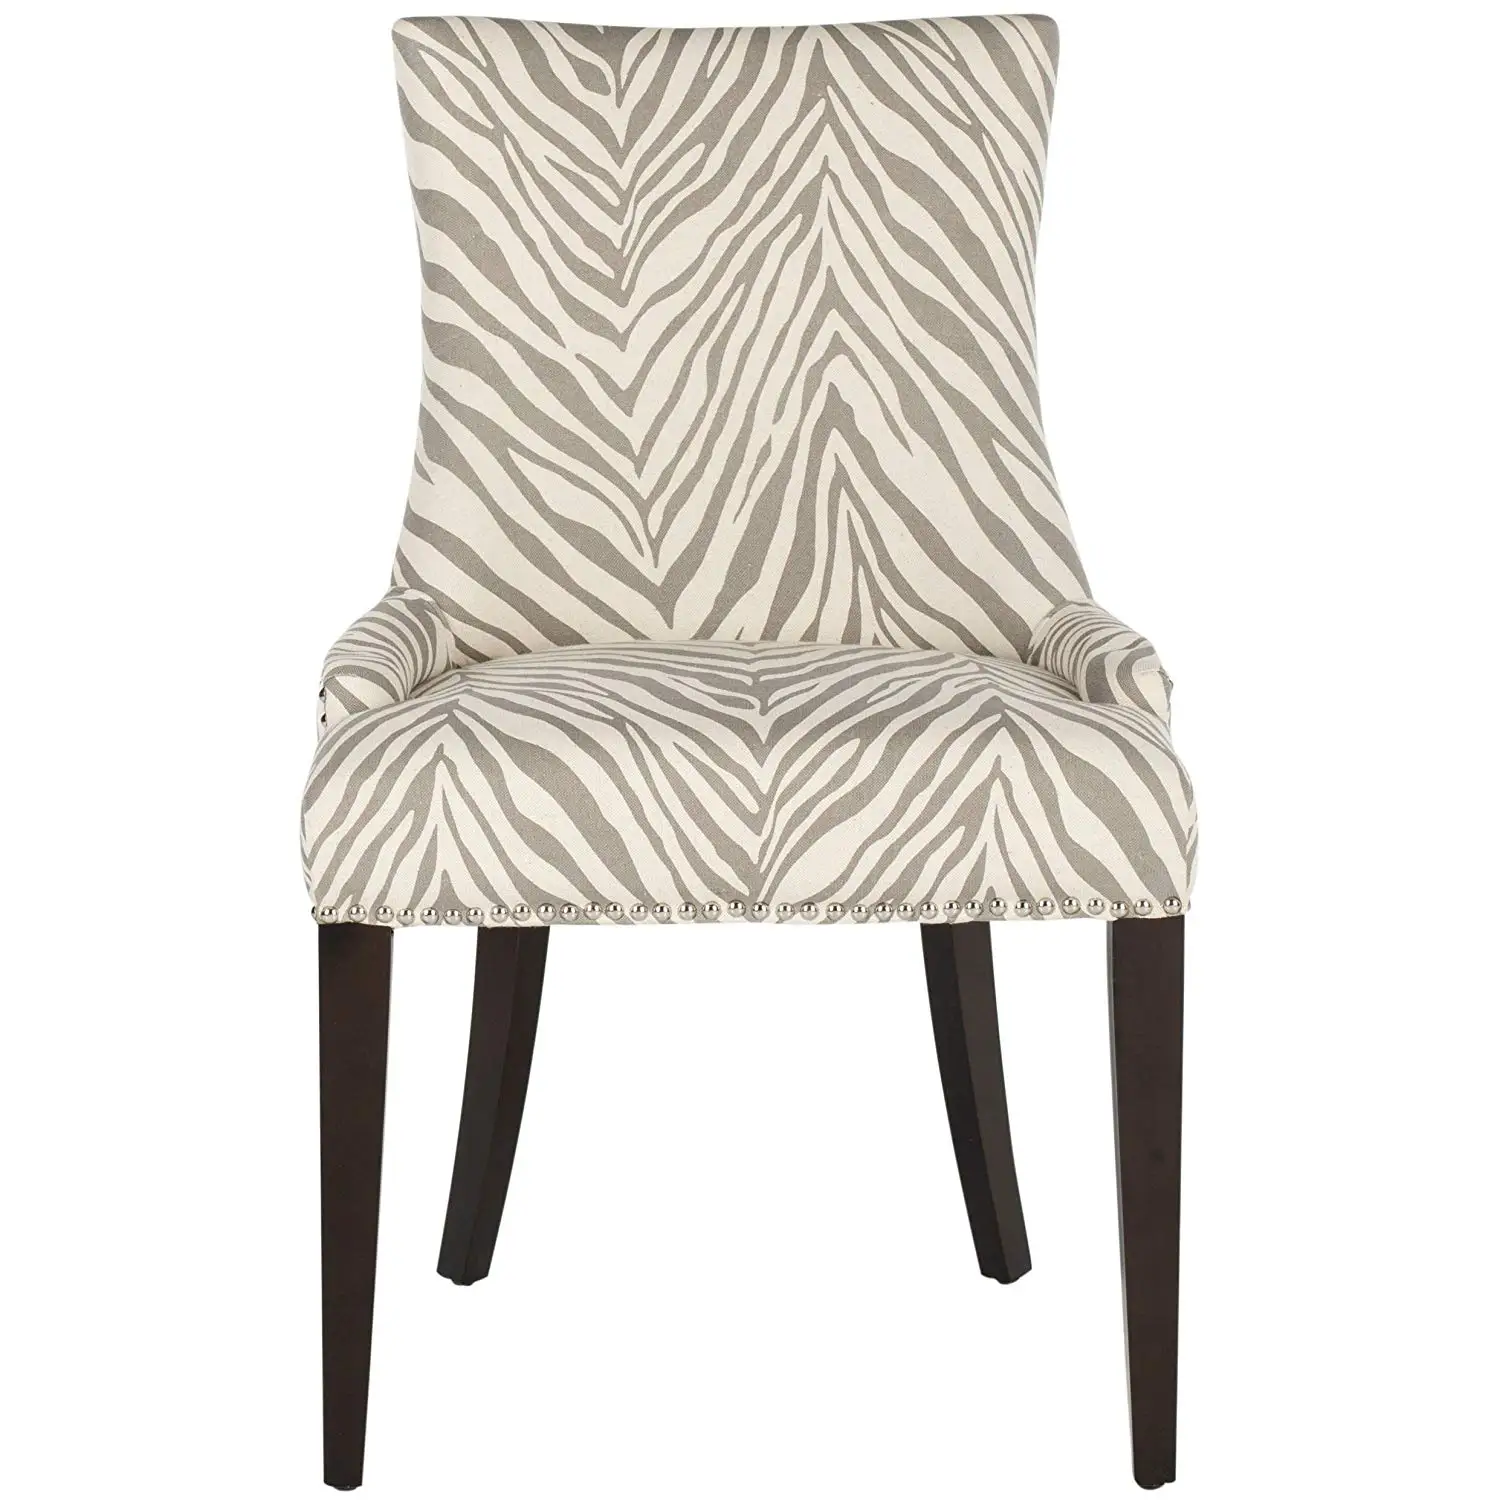 Cheap Dining Chair Covers Grey Find Dining Chair Covers Grey Deals On Line At Alibaba Com